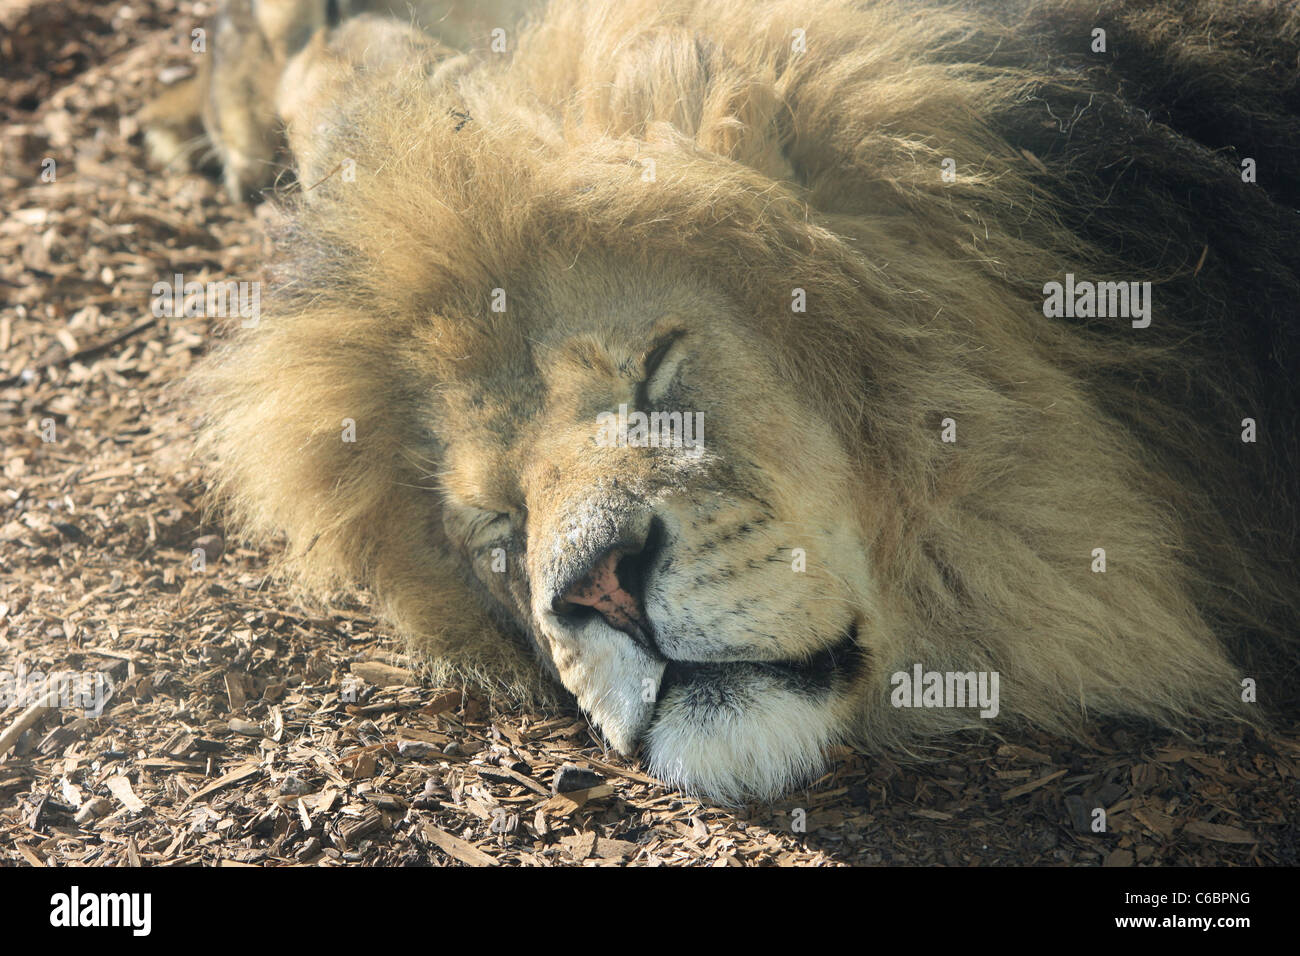 Lion asleep at Whipsnade Zoo Stock Photo